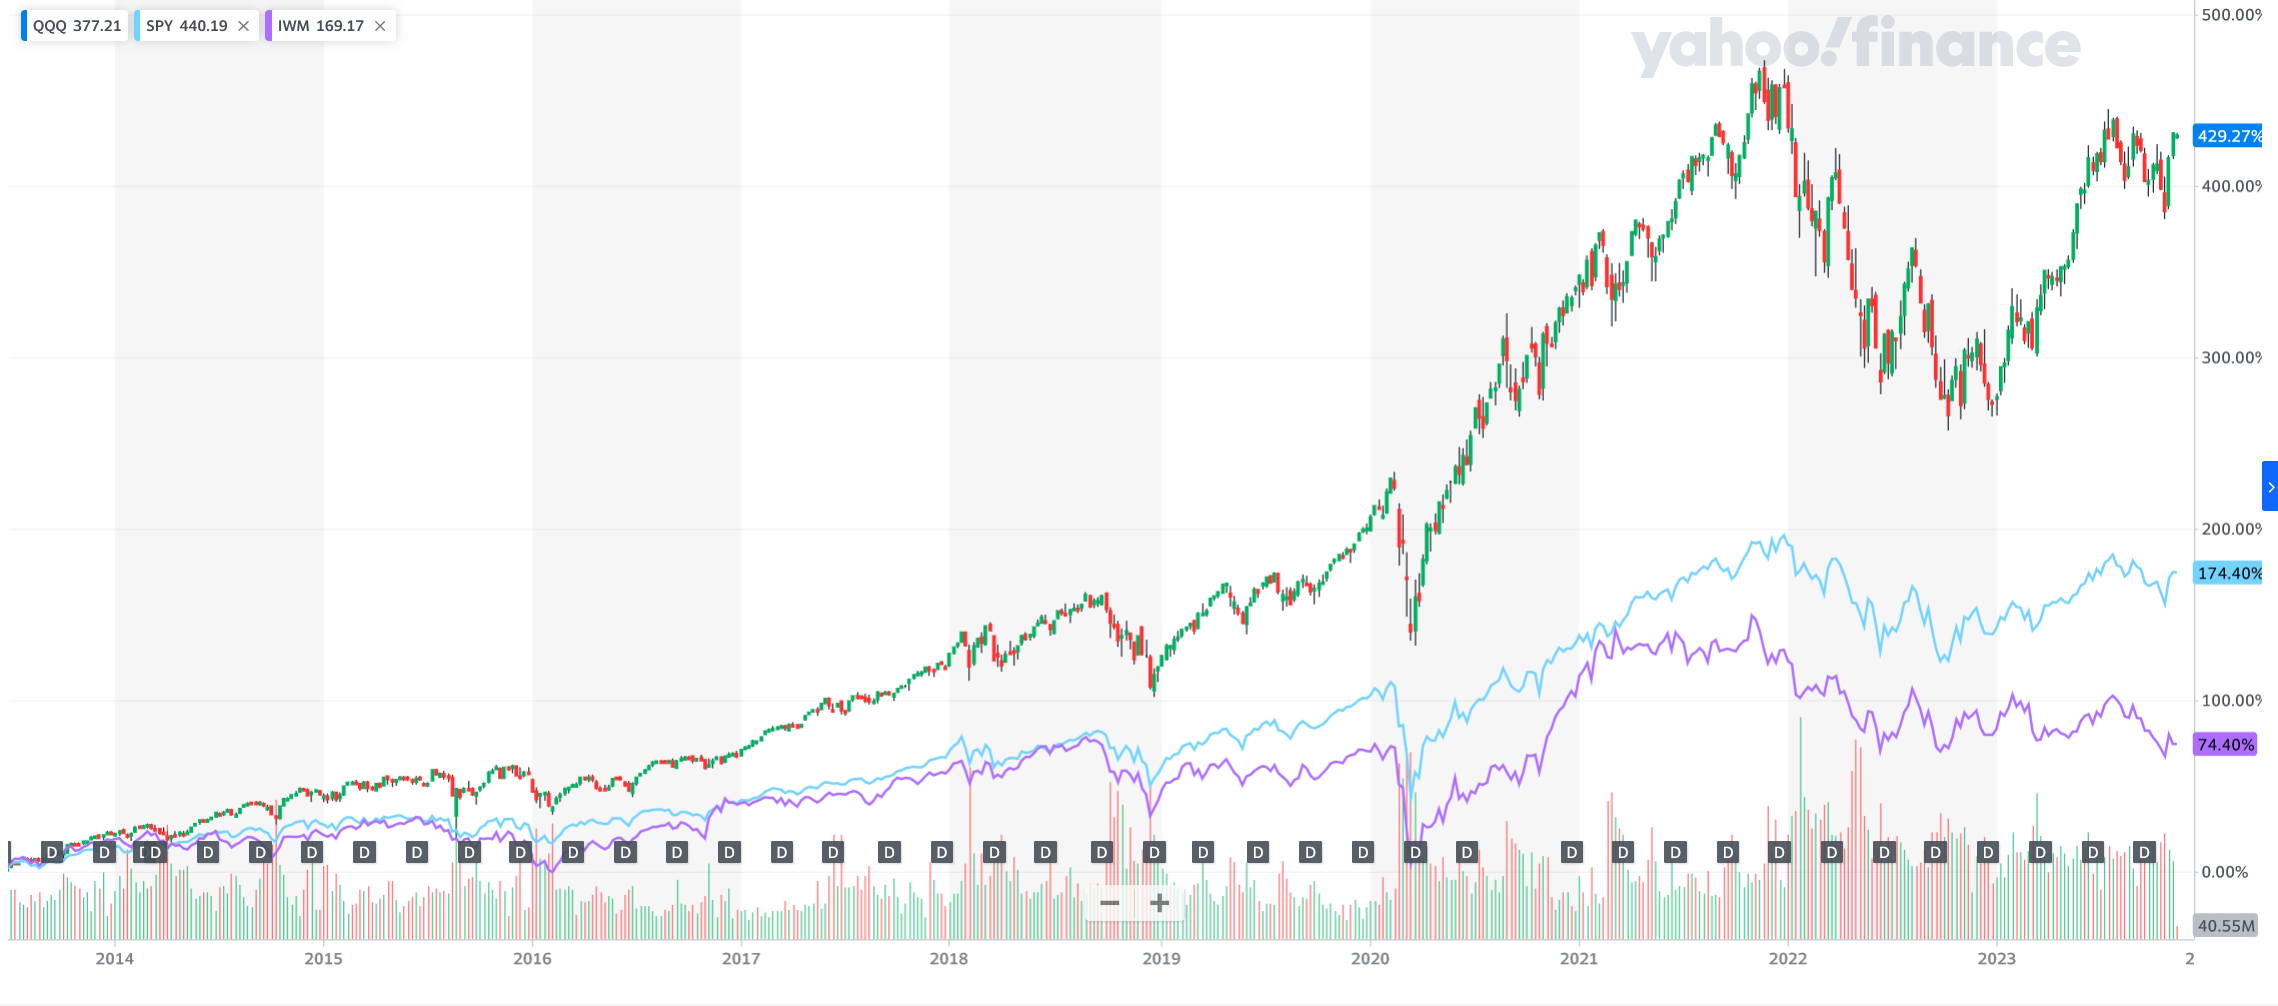 QQQ ETF Historical Returns: Pros, Cons, and More